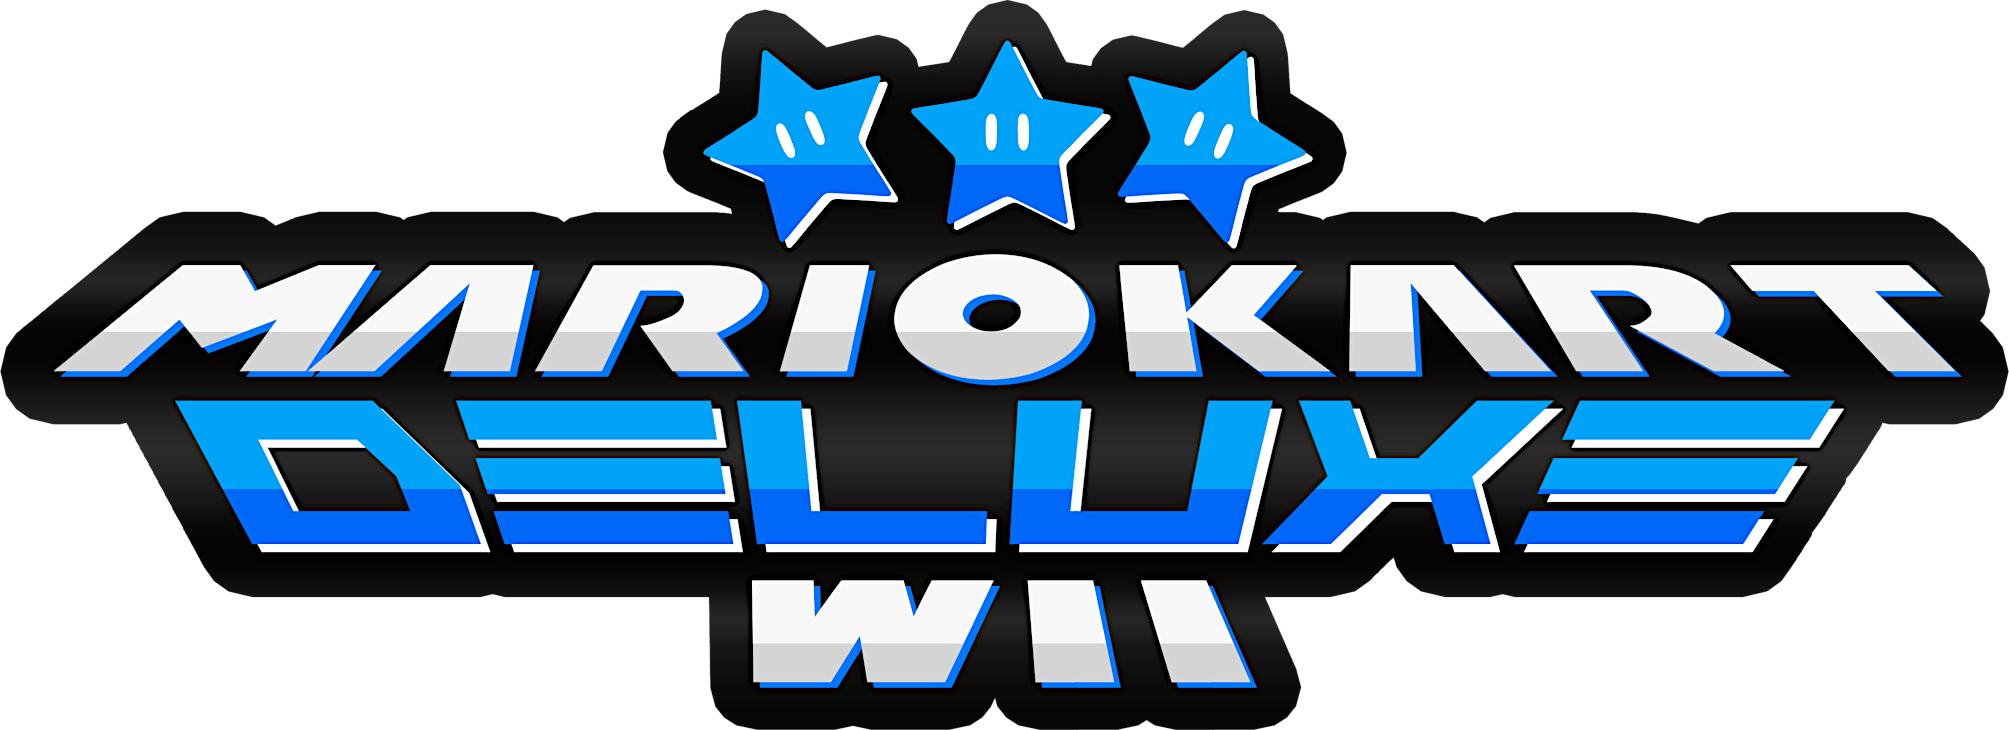 Mario Kart Wii Deluxe: Blue Edition Images - LaunchBox Games Database